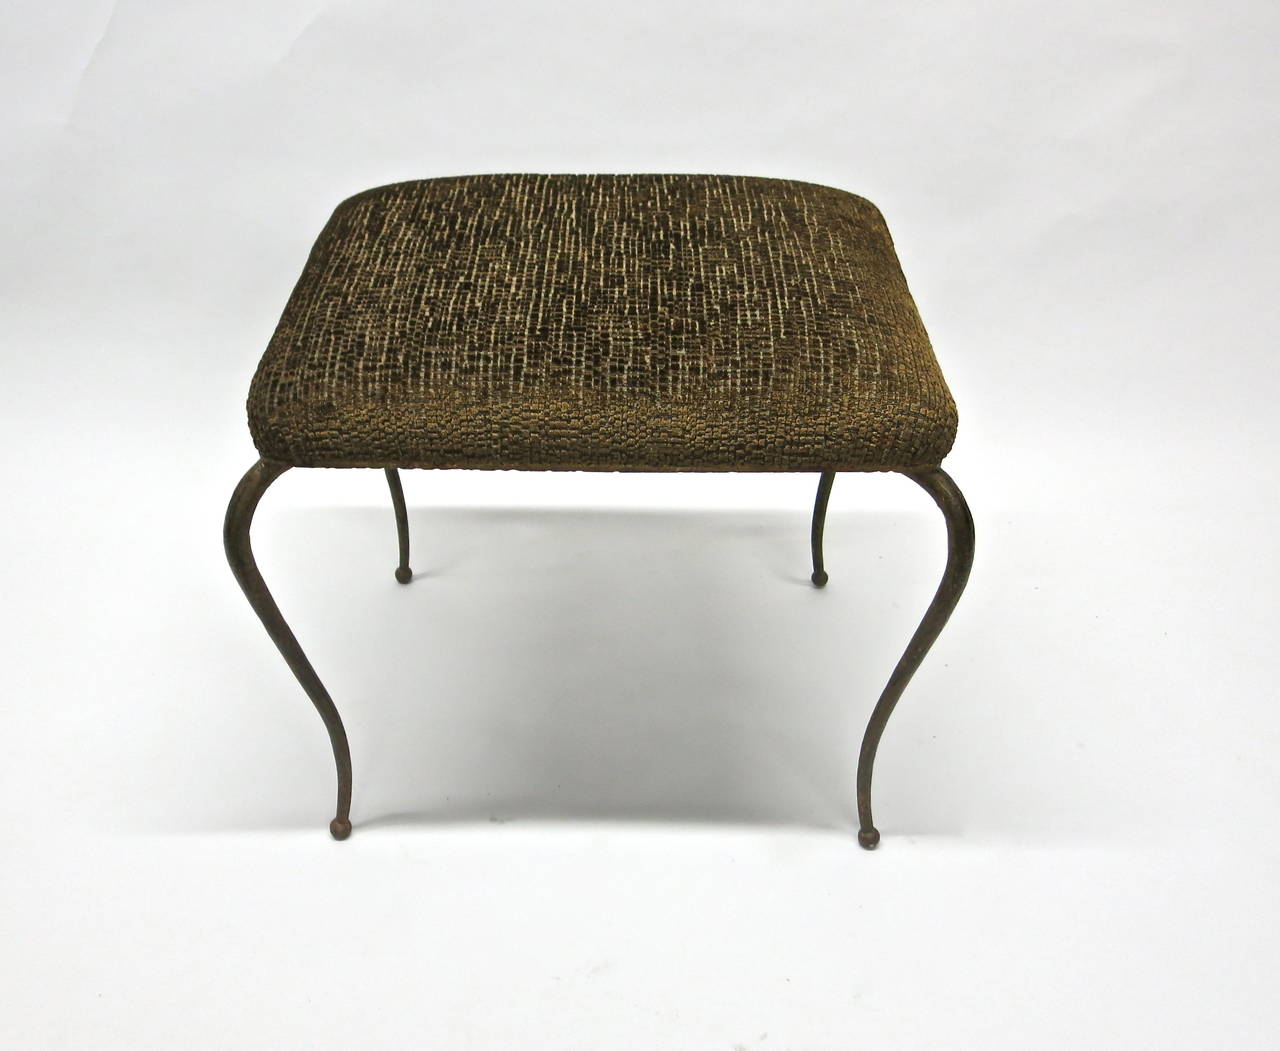 Art Deco Early Hand-Hammered Stool by René Prou, circa 1928 Made in France